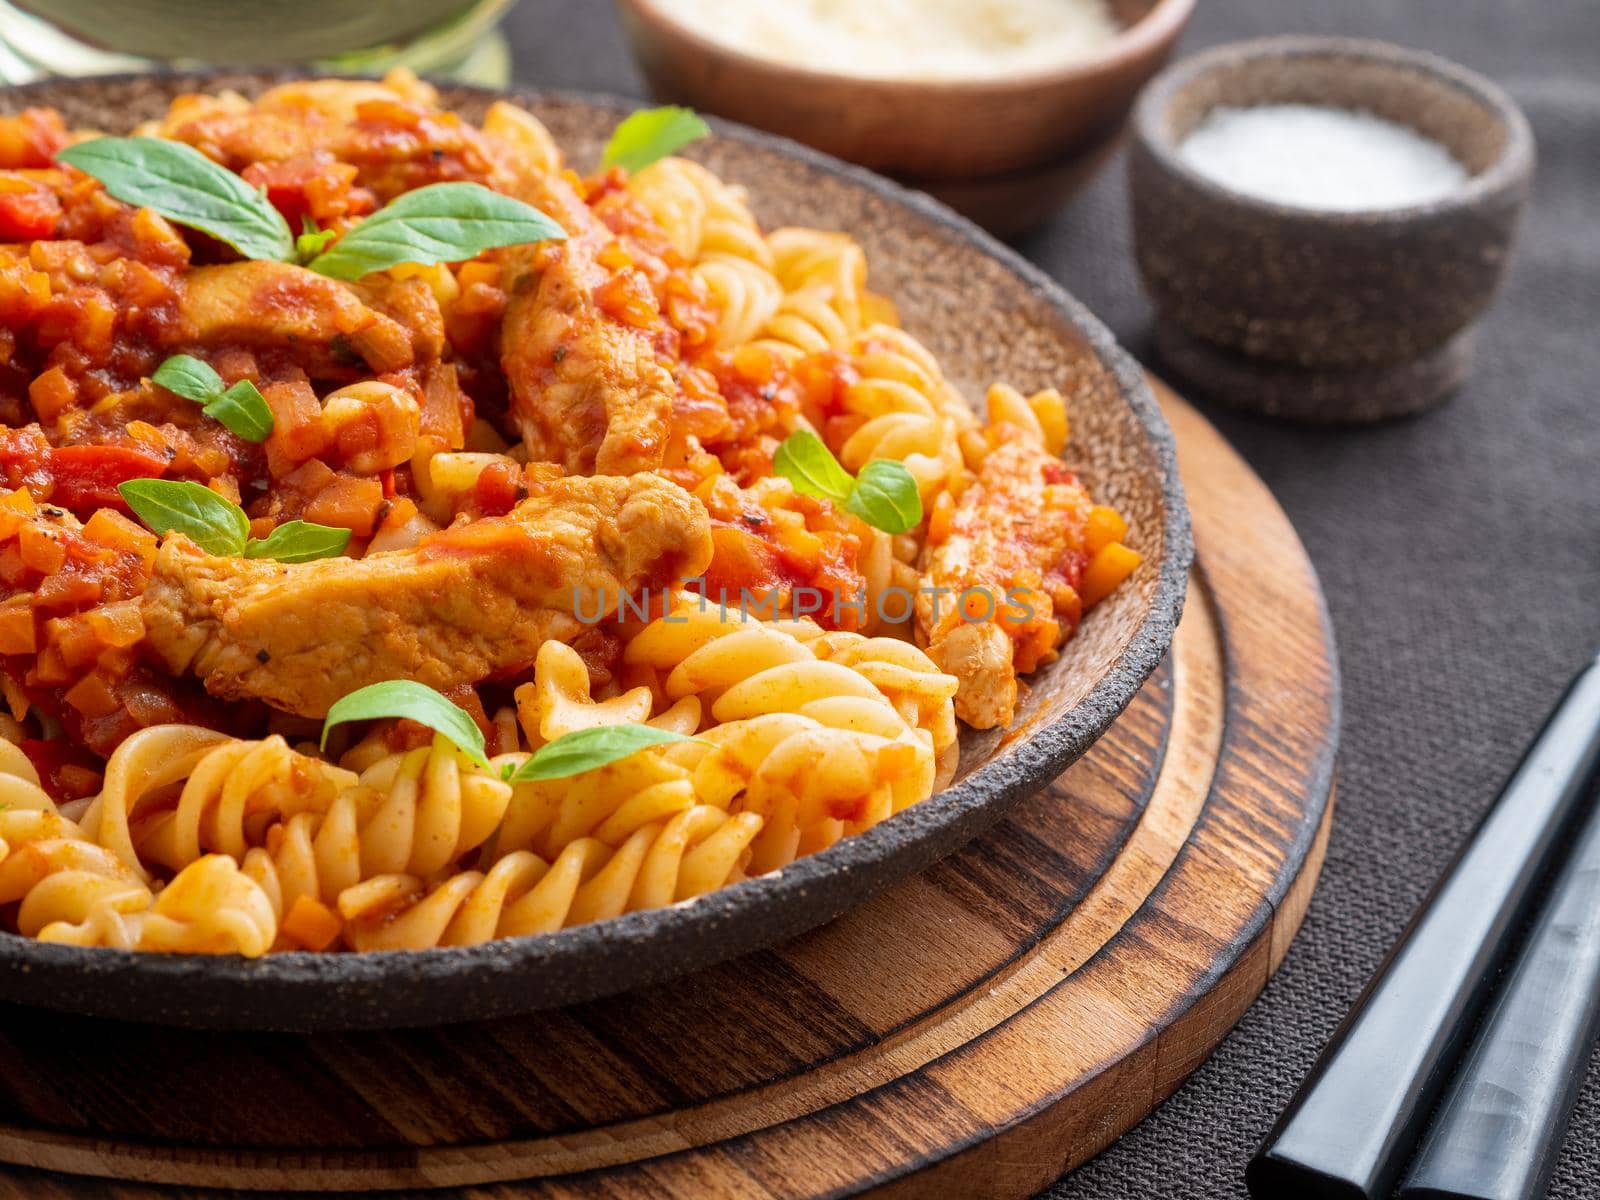 fusilli pasta with tomato sauce, chicken fillet with basil leaves on dark brown background, side view.